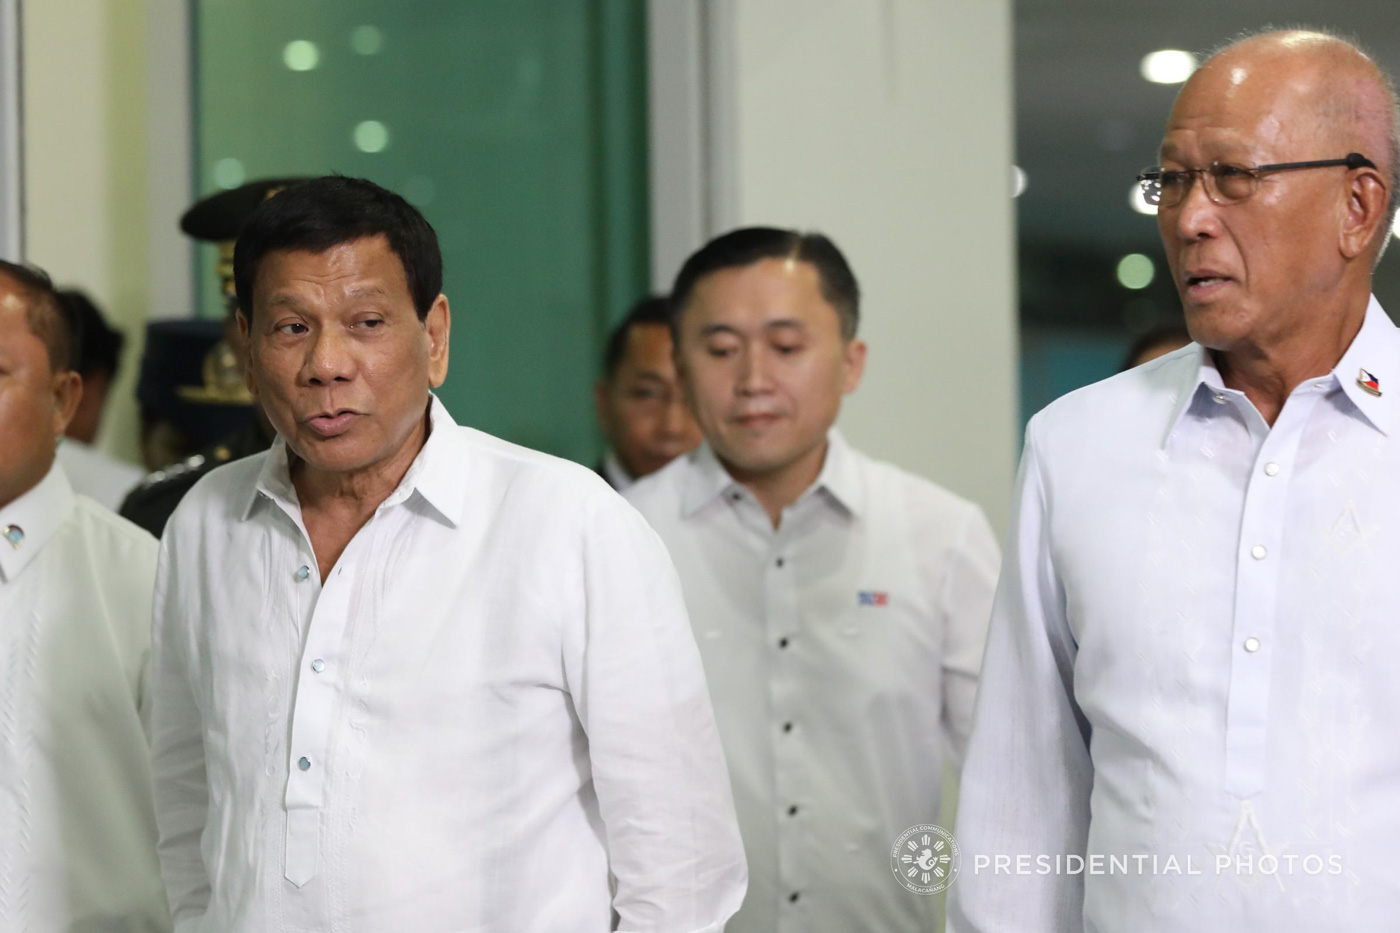 PHILIPPINE LEADER. President Rodrigo Dutere arrives at the Francisco Bangoy International Airport in Davao City on April 26, 2018 to deliver his speech prior to his departure for the ASEAN Summit in Singapore. Malacañang photo 